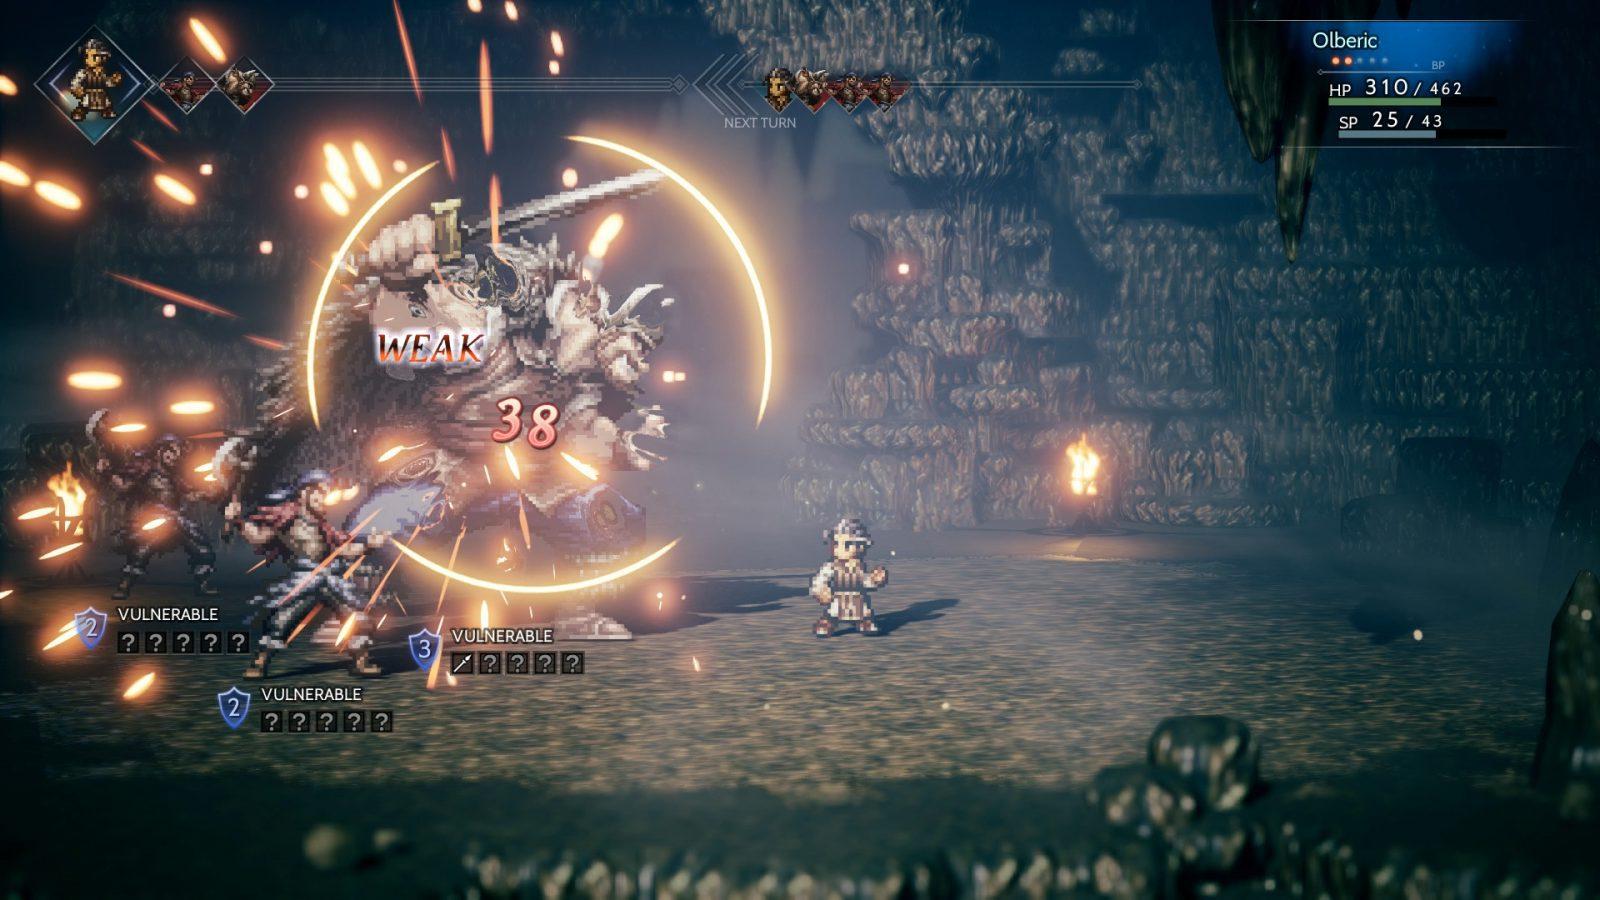 Pre Orders Now Live For Octopath Traveler On Steam, Includes 11